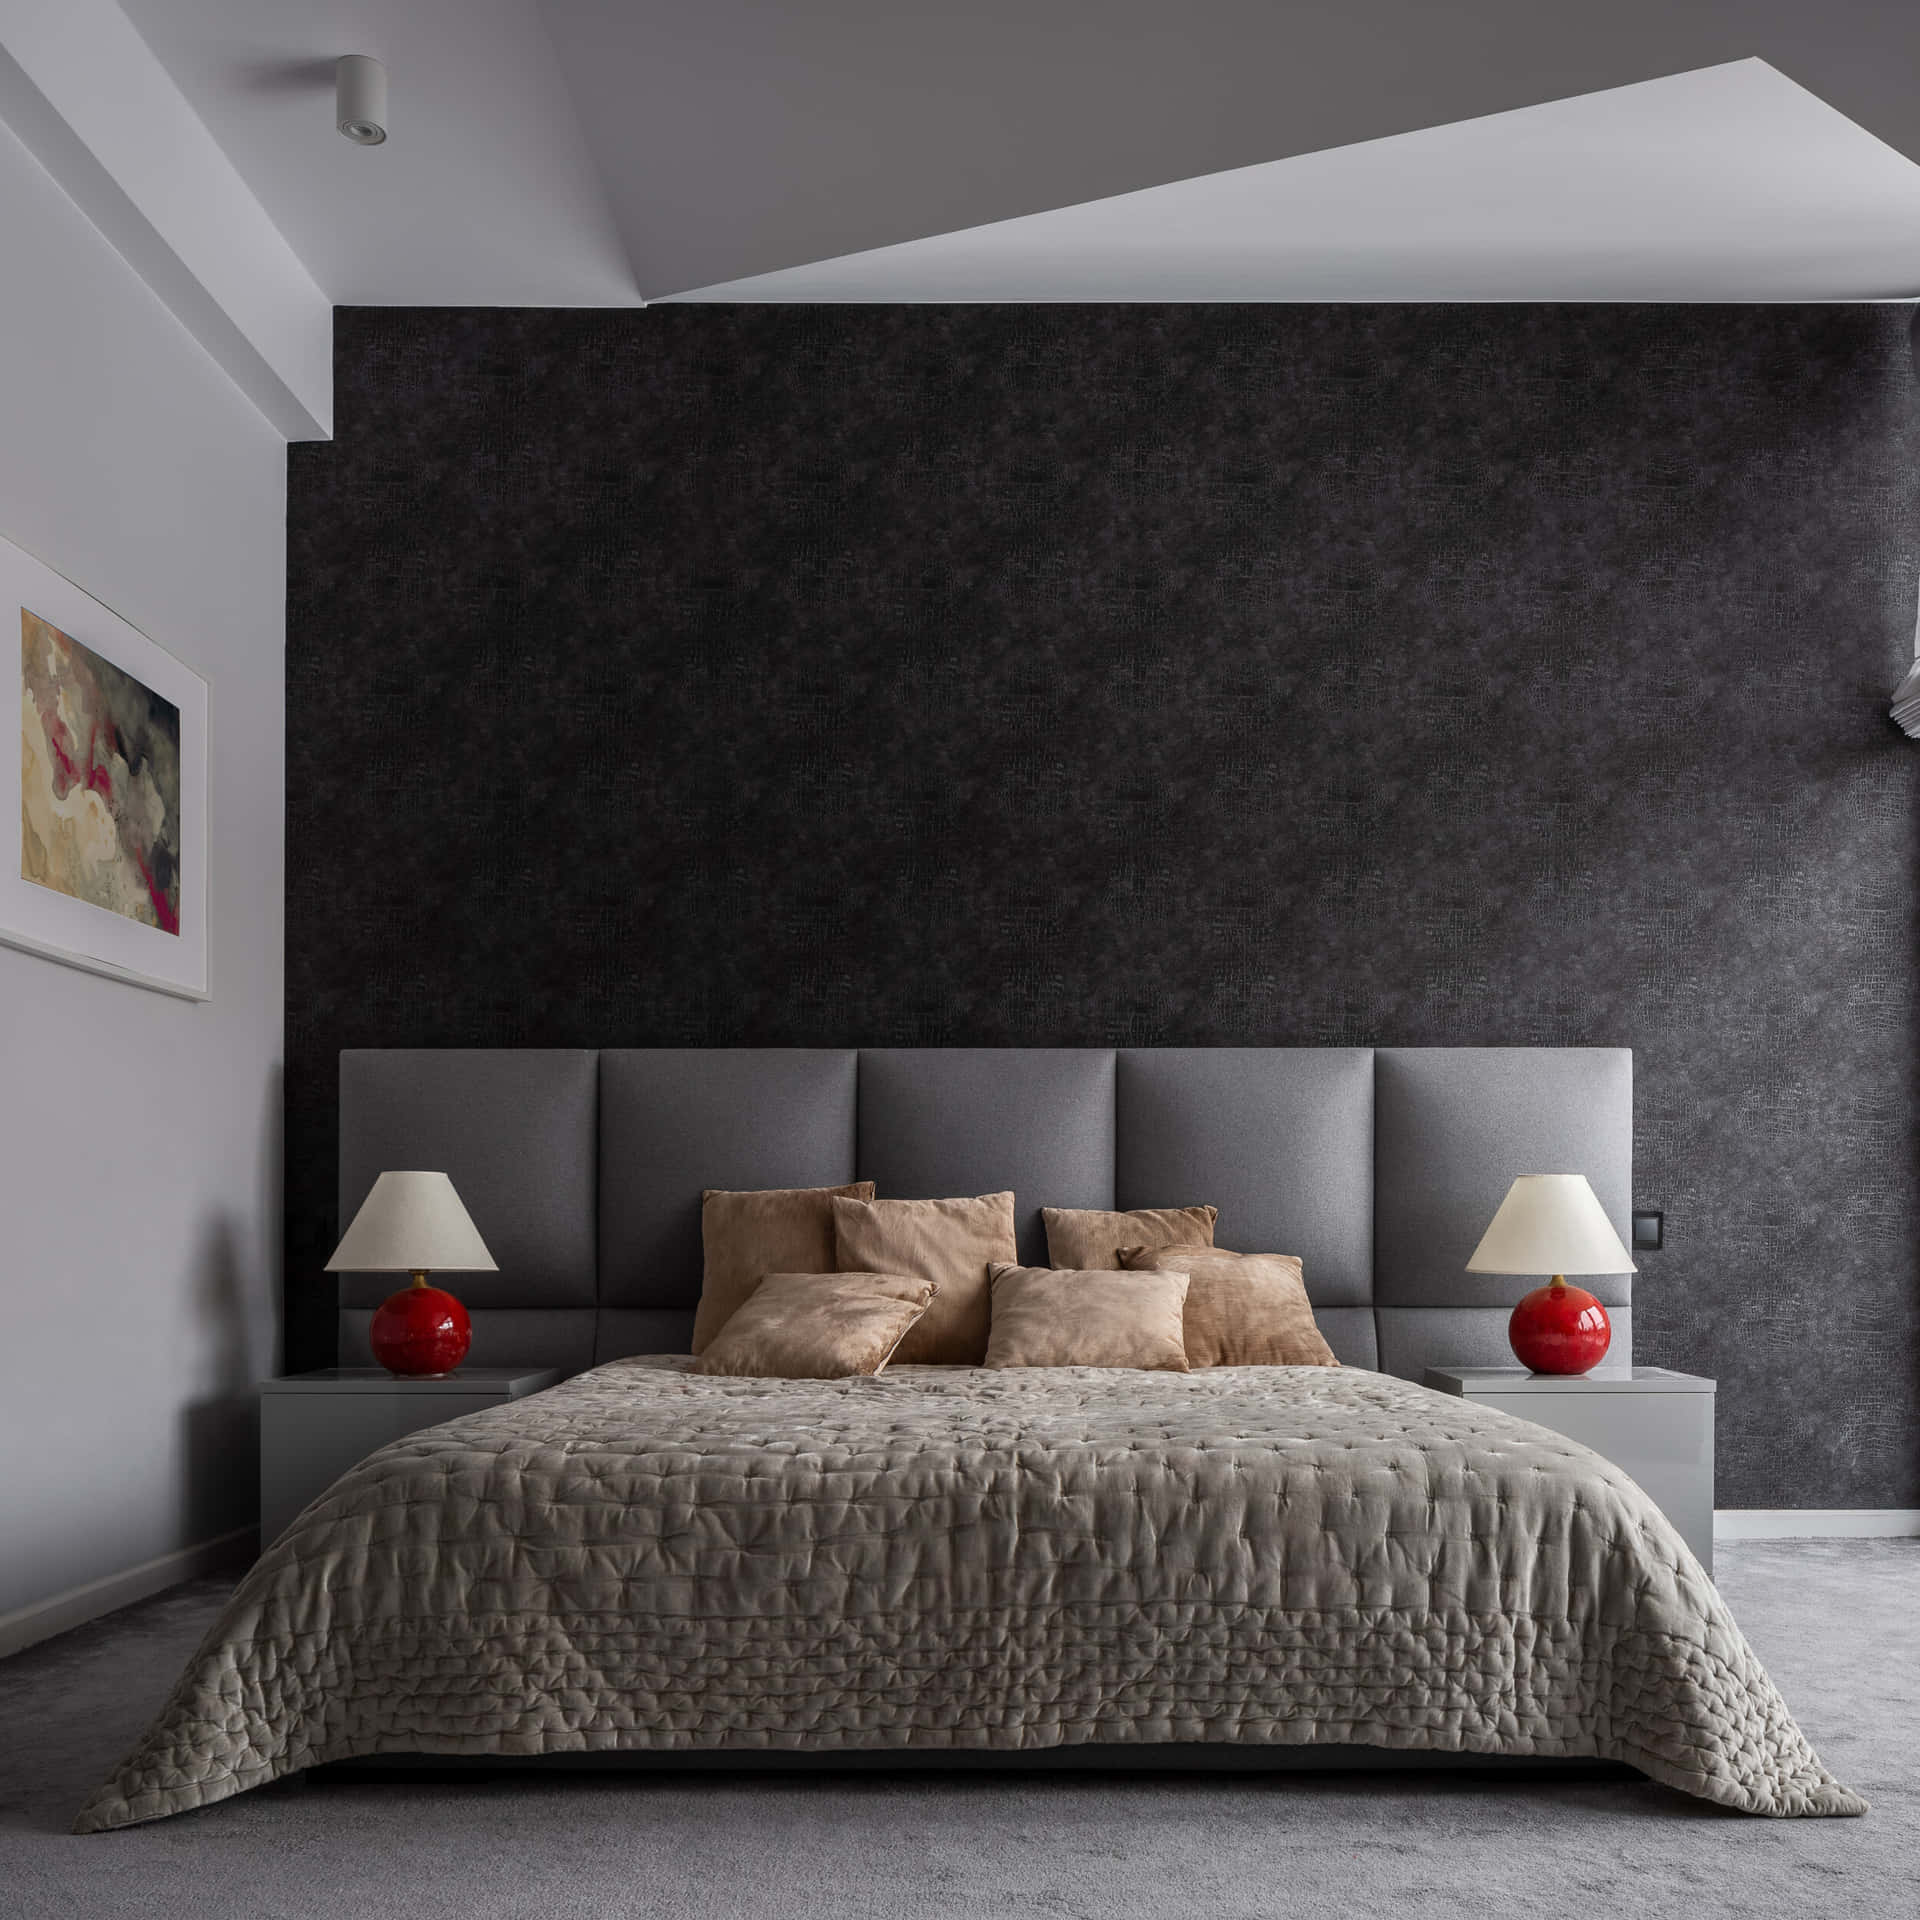 Sophisticated Queen Size Bed In Dark Ambiance